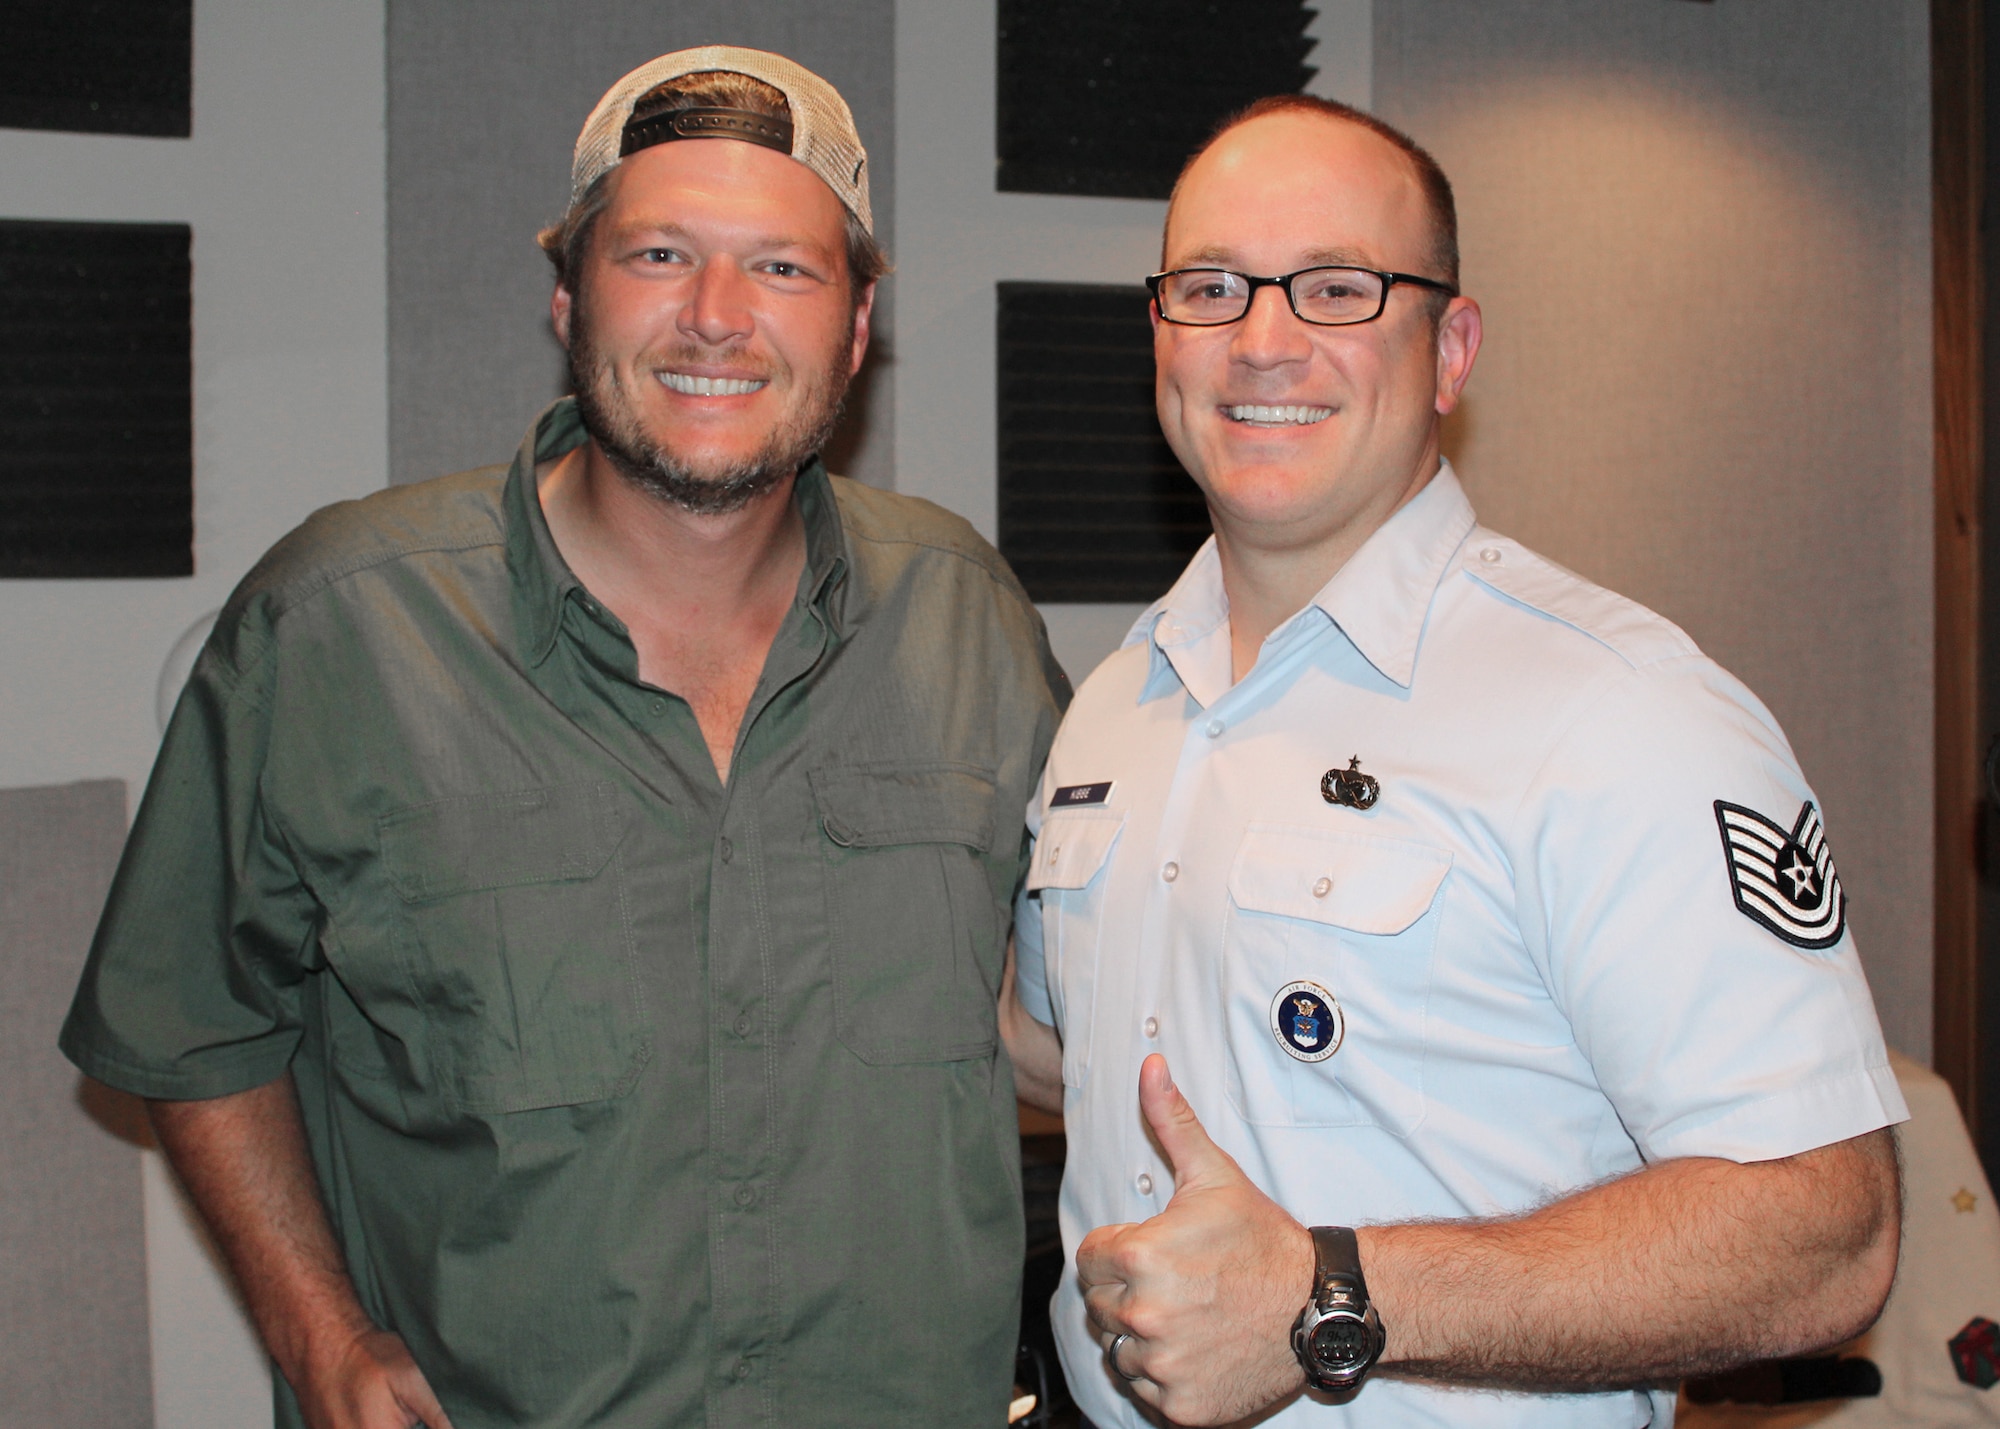 Tech. Sgt. Harry Kibbe gives a thumbs up after interviewing country supertar Blake Shelton for the 2013 "Red, White and Air Force Blue Christmas" radio special. The one-hour program, recorded at Spotland Productions in Nashville, will be sent to more than 2,000 country radio stations in the United States and the Armed Forces Network for airing during the upcoming holiday season. Air Force Recruiting Service produces the annual holiday special.